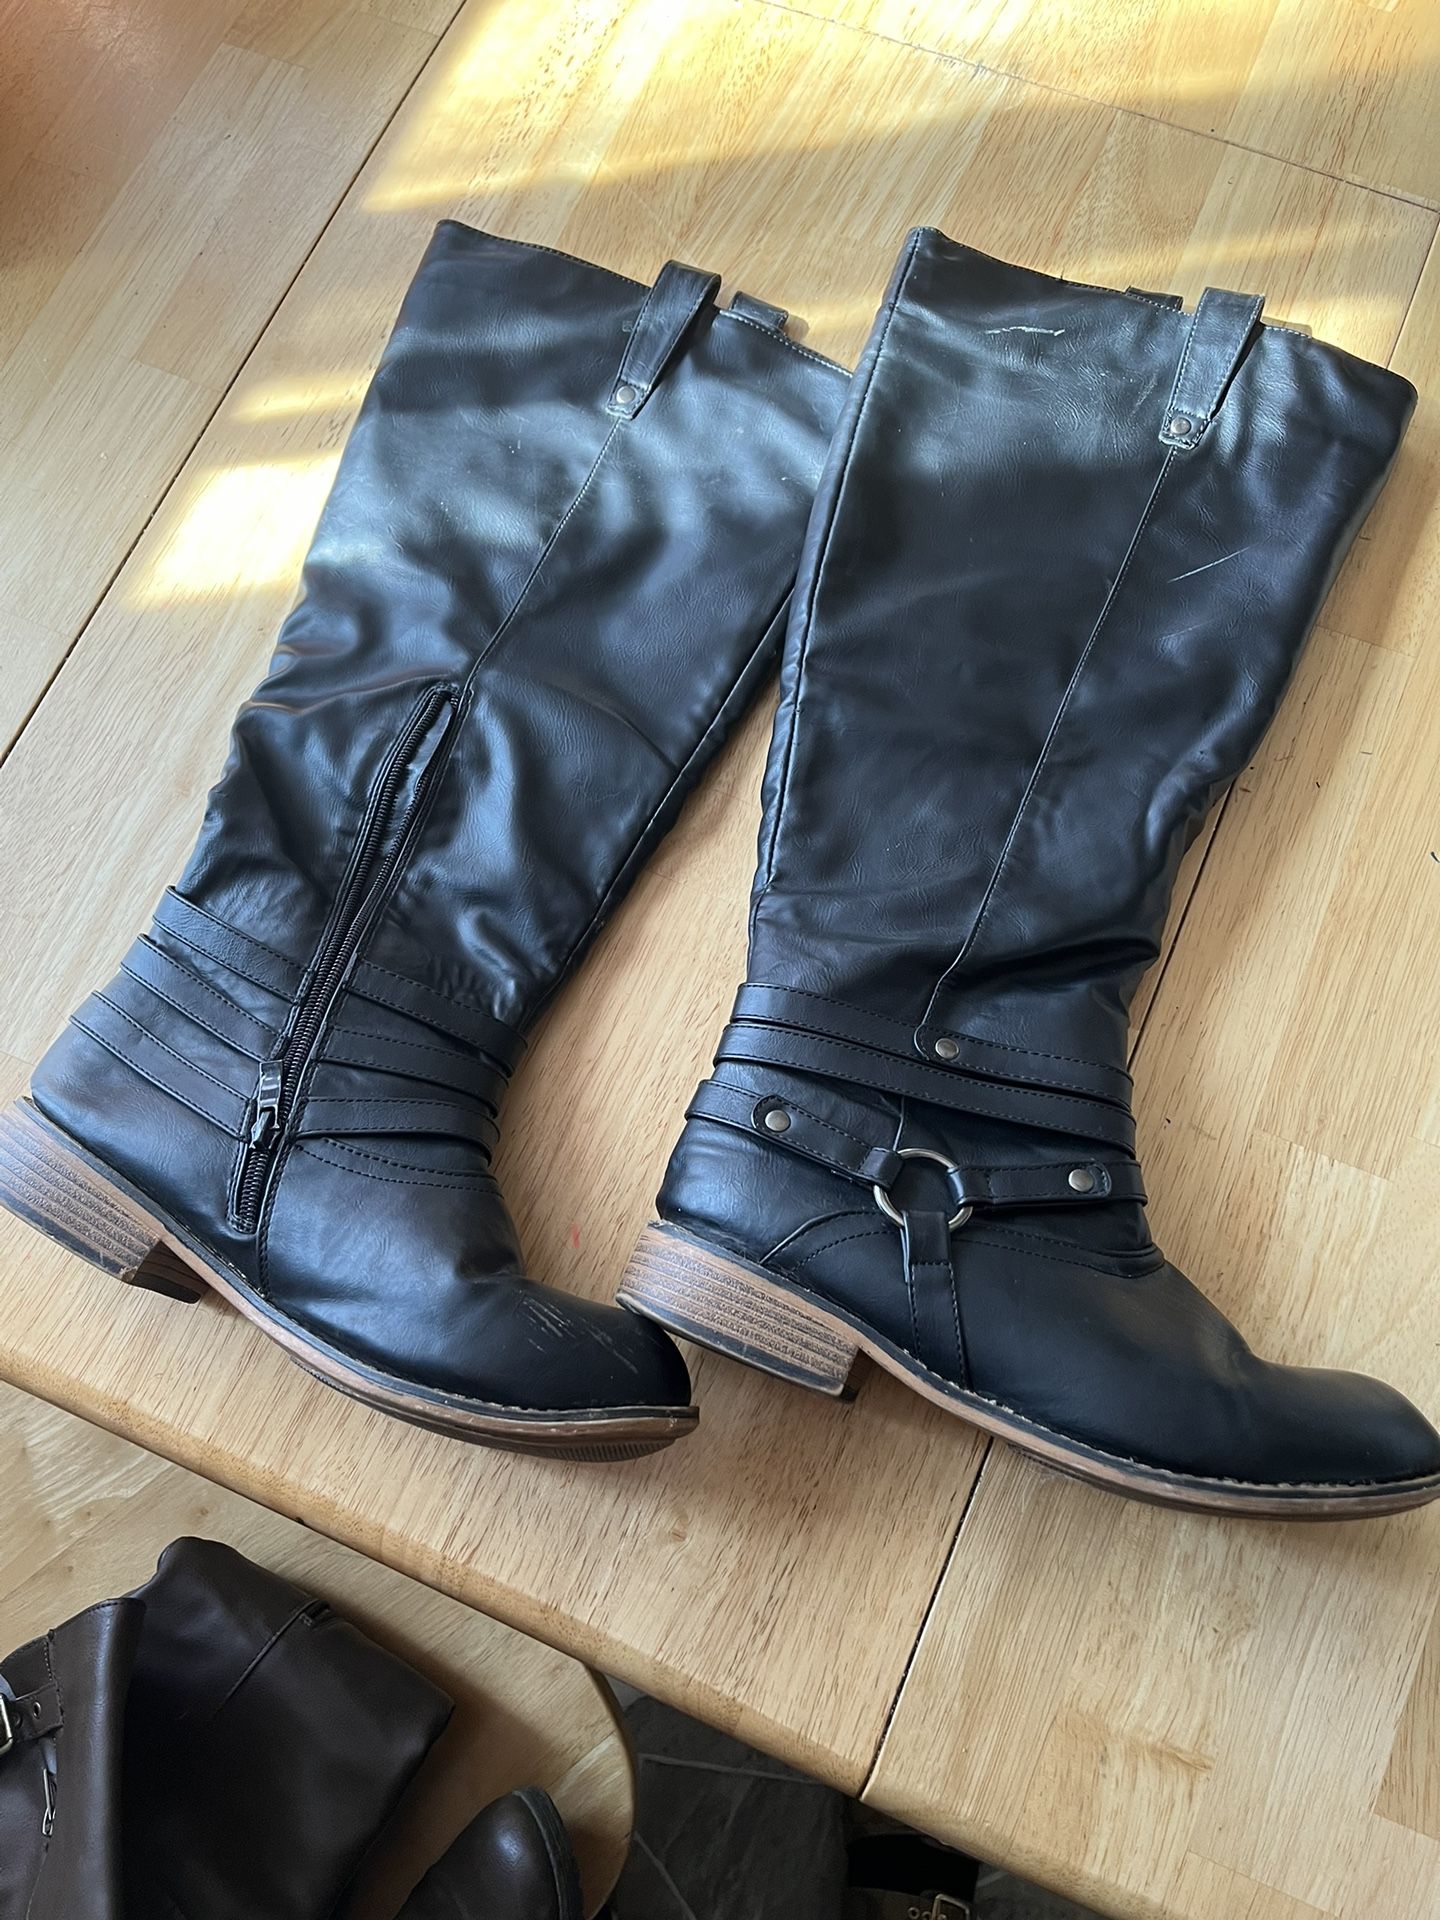 Boots Size 8.5 Black Womens